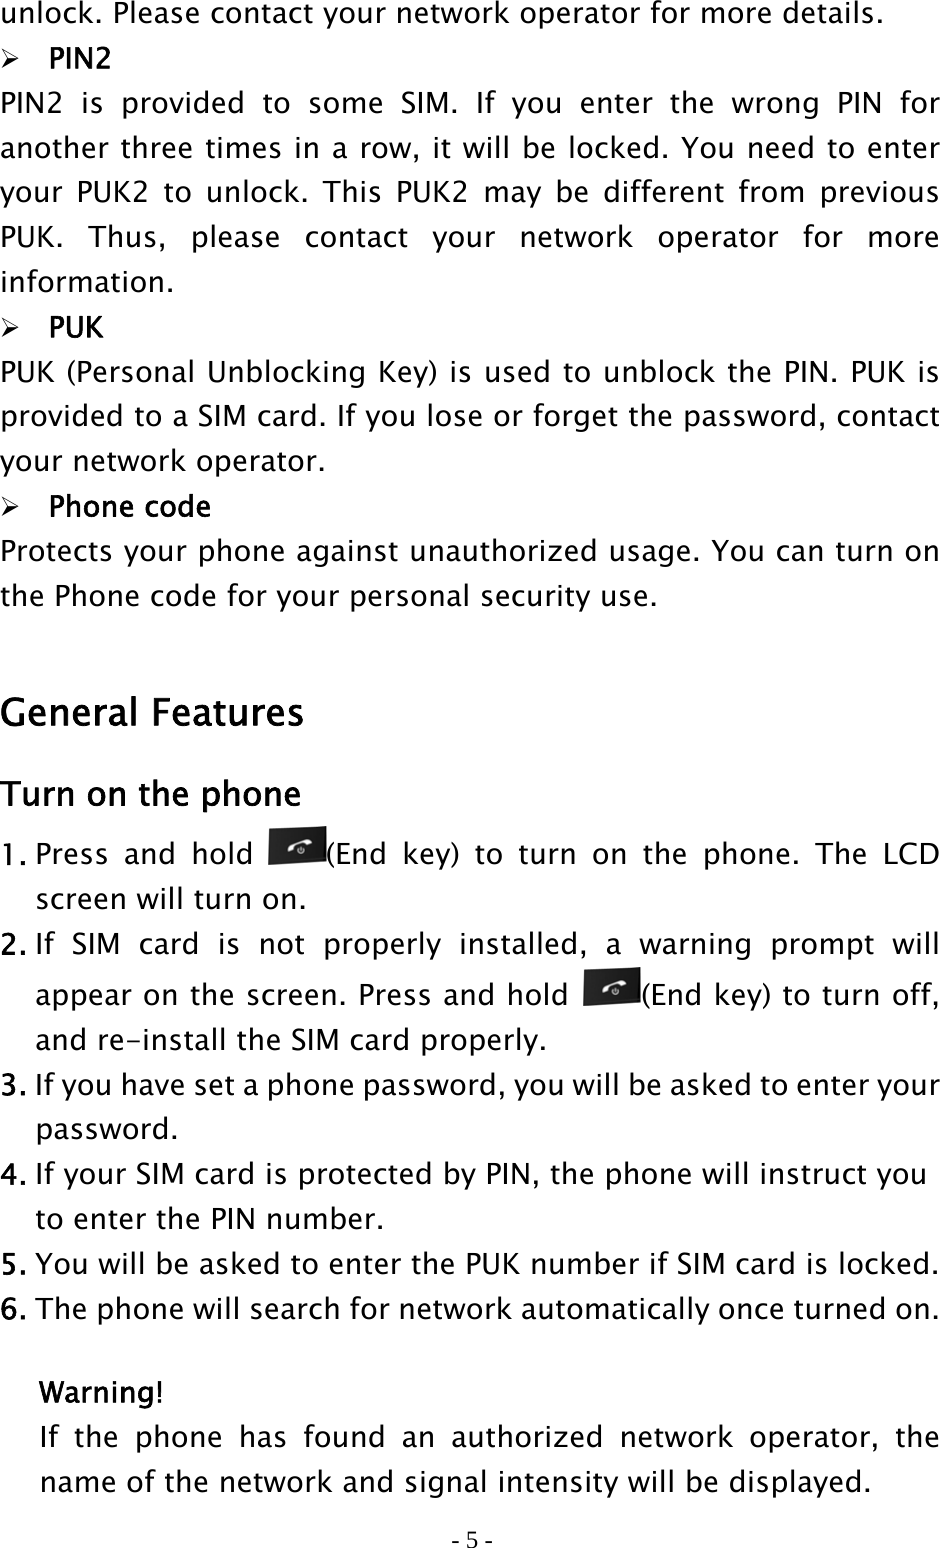 - 5 - unlock. Please contact your network operator for more details.  PIN2 PIN2 is provided to some SIM. If you enter the wrong PIN for another three times in a row, it will be locked. You need to enter your PUK2 to unlock. This PUK2 may be different from previous PUK. Thus, please contact your network operator for more information.  PUK PUK (Personal Unblocking Key) is used to unblock the PIN. PUK is provided to a SIM card. If you lose or forget the password, contact your network operator.  Phone code Protects your phone against unauthorized usage. You can turn on the Phone code for your personal security use.  General Features Turn on the phone 1. Press and hold  (End key) to turn on the phone. The LCD screen will turn on. 2. If SIM card is not properly installed, a warning prompt will appear on the screen. Press and hold  (End key) to turn off, and re-install the SIM card properly. 3. If you have set a phone password, you will be asked to enter your    password. 4. If your SIM card is protected by PIN, the phone will instruct you     to enter the PIN number. 5. You will be asked to enter the PUK number if SIM card is locked. 6. The phone will search for network automatically once turned on.  Warning! If the phone has found an authorized network operator, the name of the network and signal intensity will be displayed. 